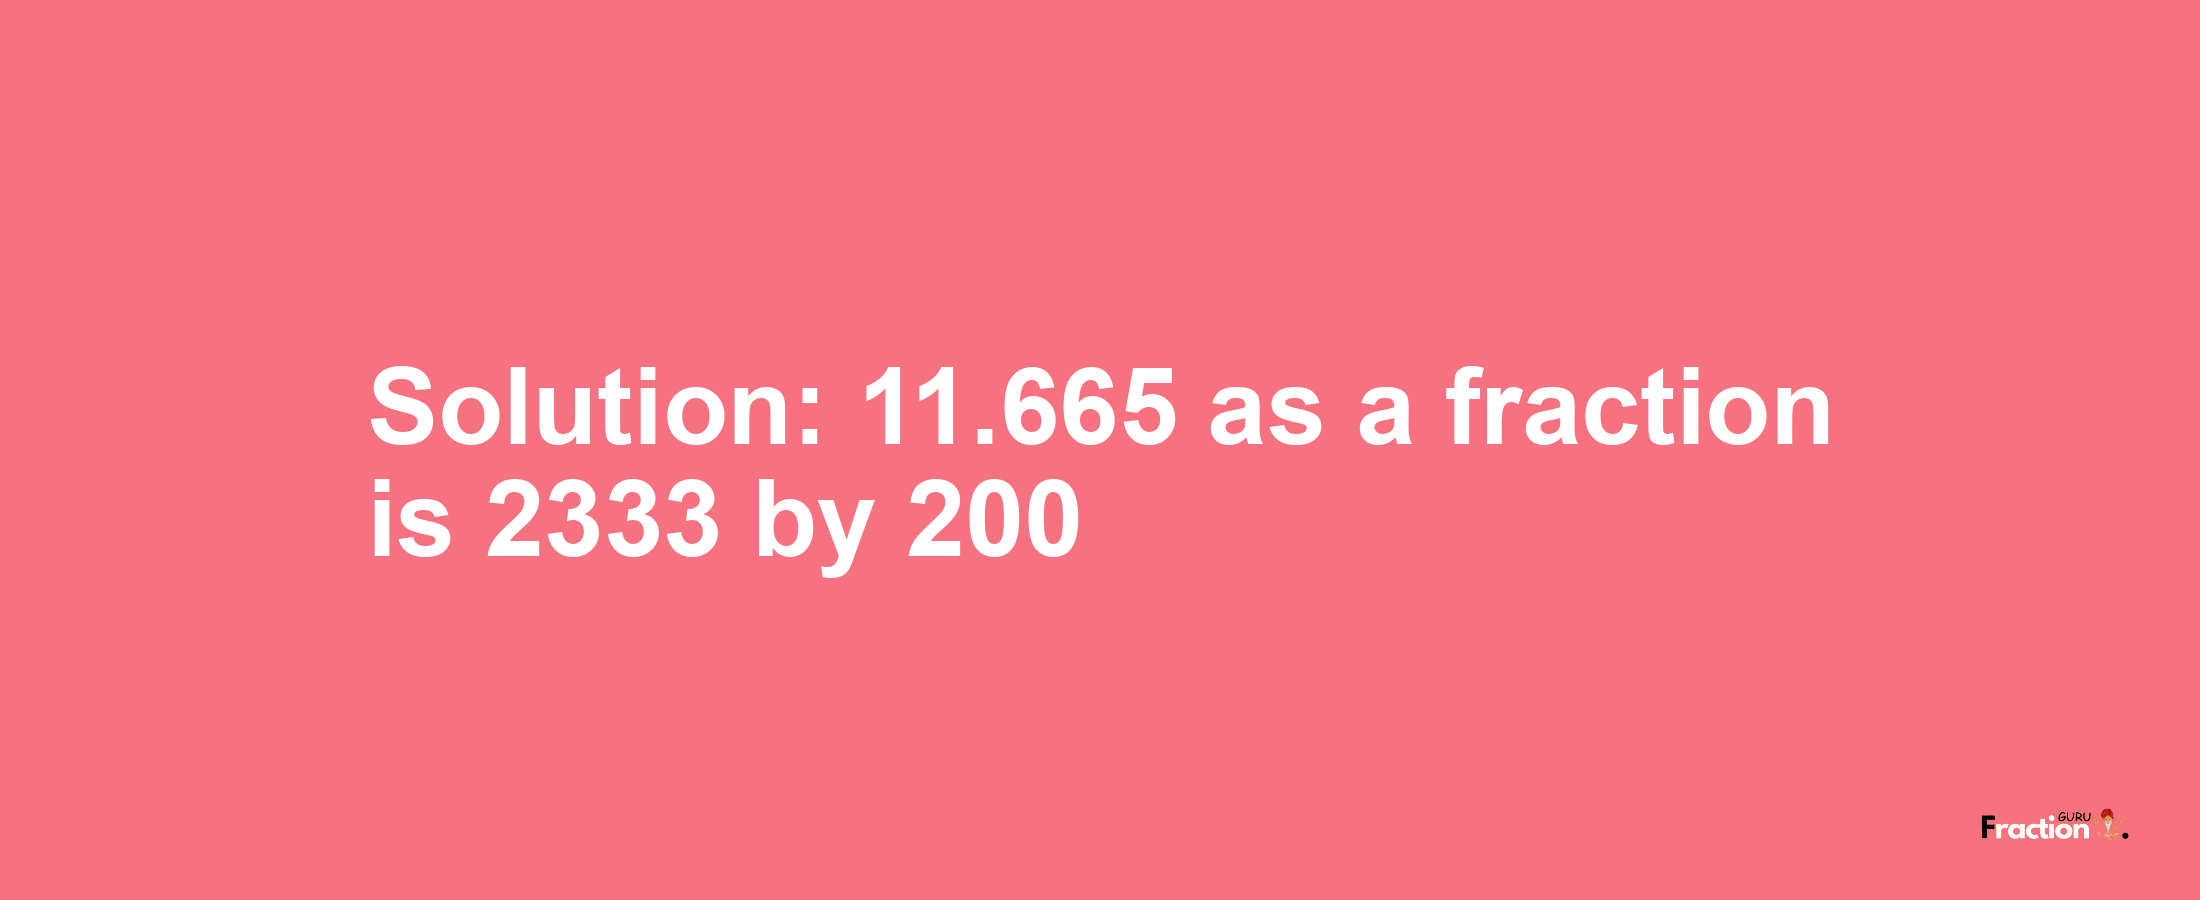 Solution:11.665 as a fraction is 2333/200